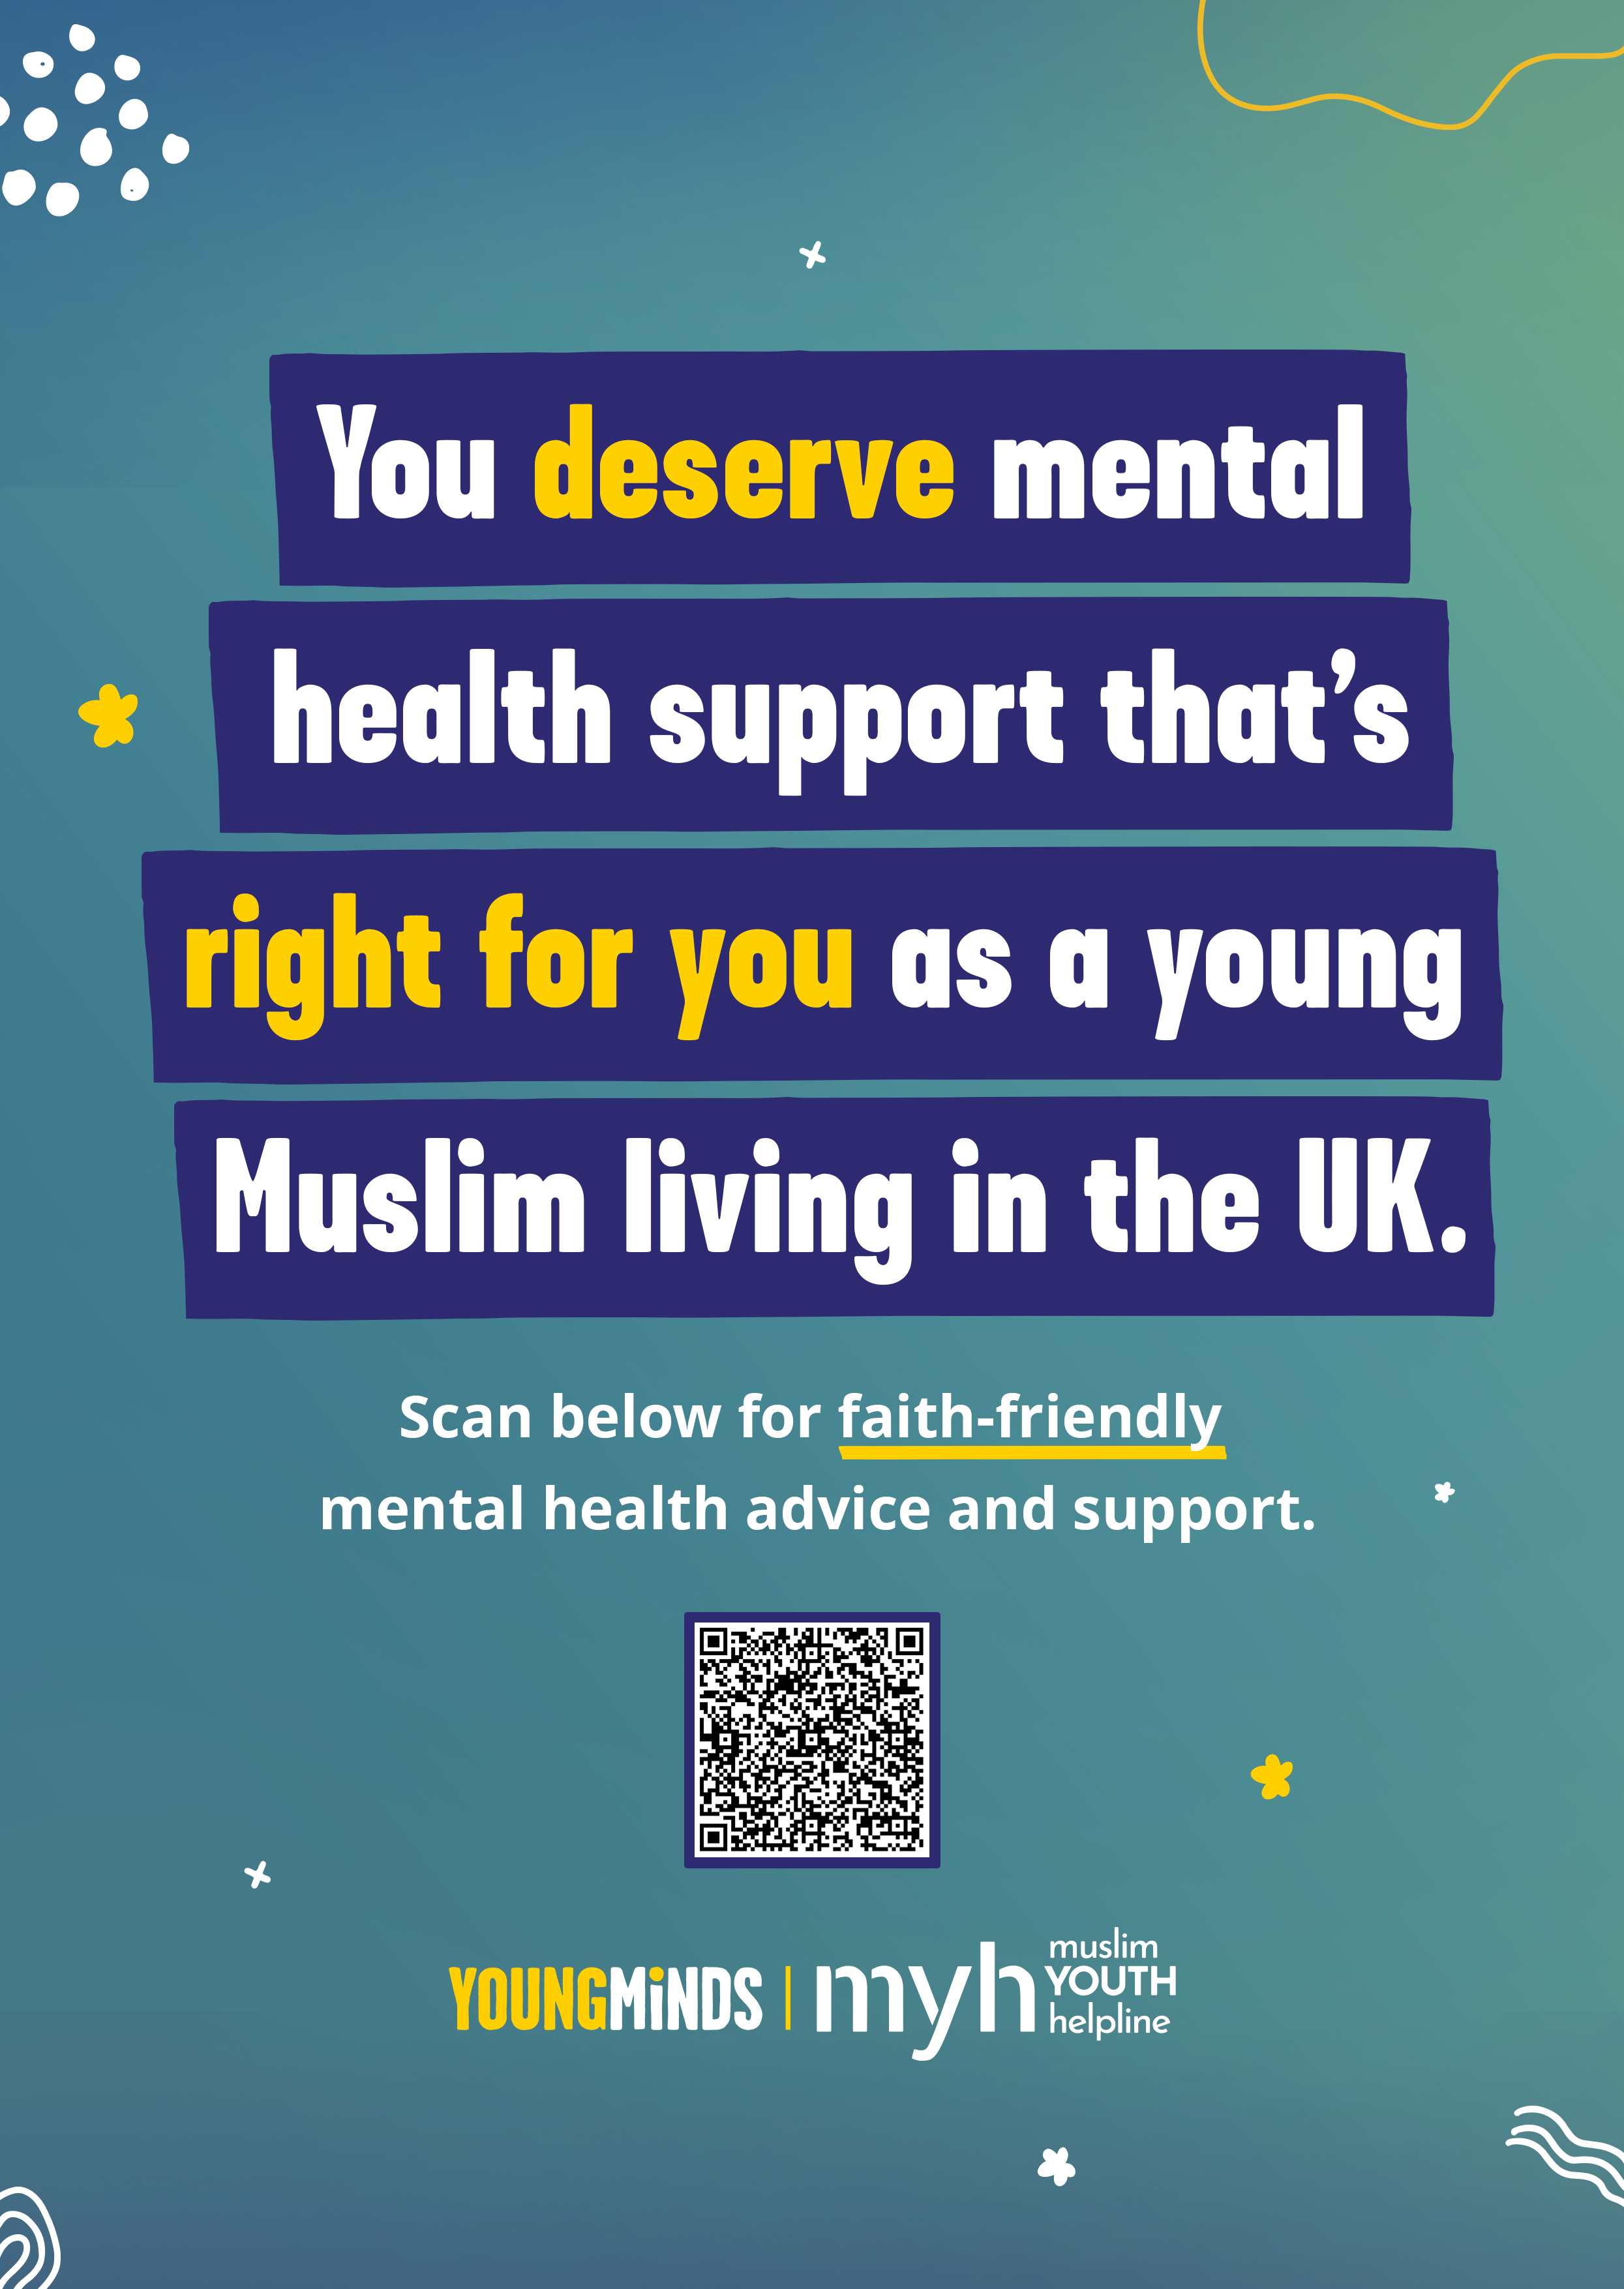 Signposting poster for young Muslims that reads: 'You deserve mental health support that's right for you as a young Muslim living in the UK.'